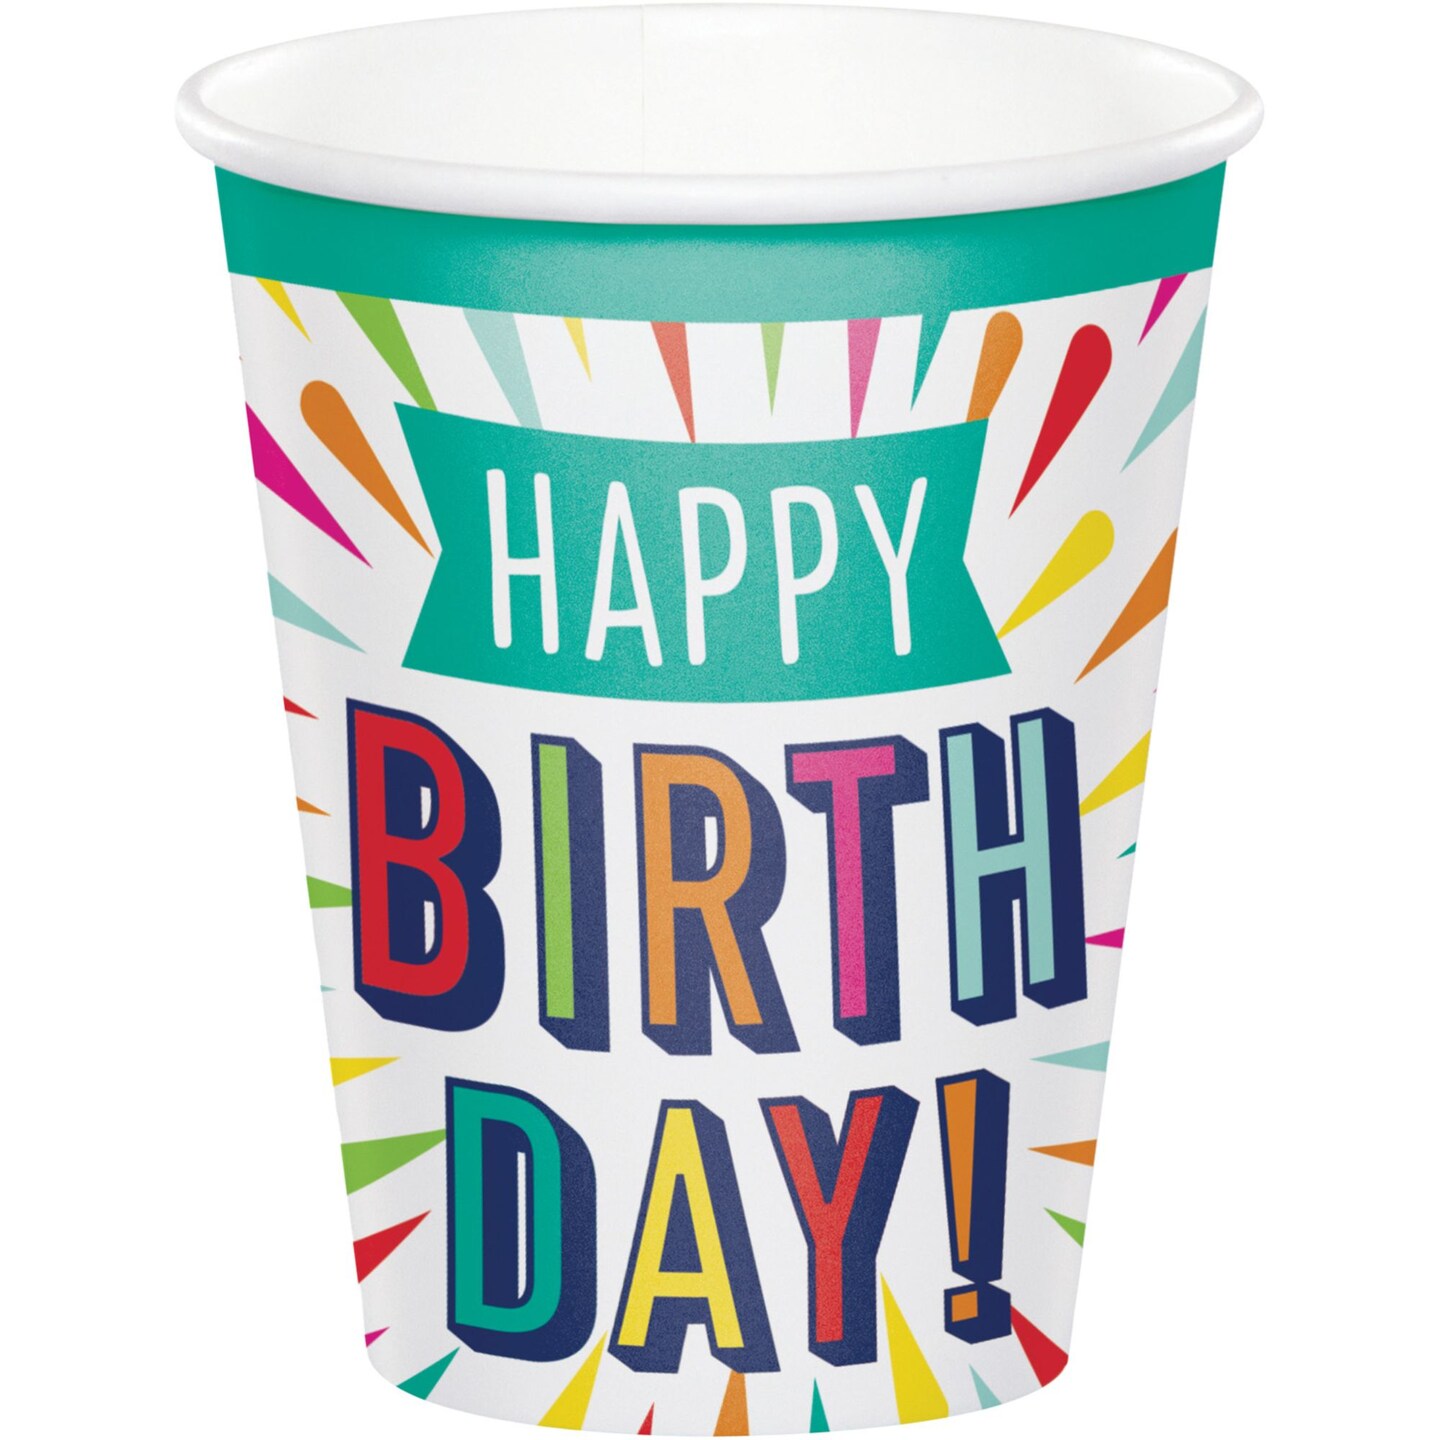 Party Central Club Pack of 96 White Birthday Burst Cups Disposable Paper Drinking Party Tumbler Cups 9 oz.